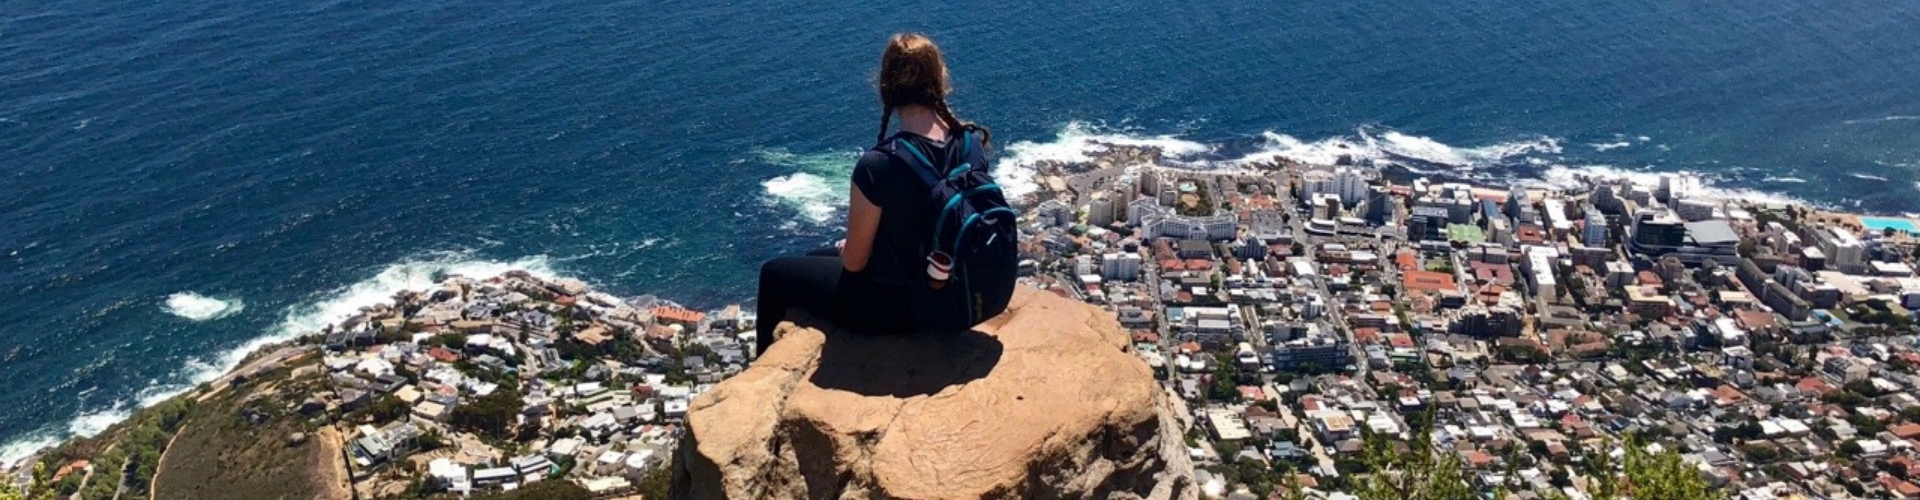 Student peched on Lions Head overlooking Table Bay in S. Africa